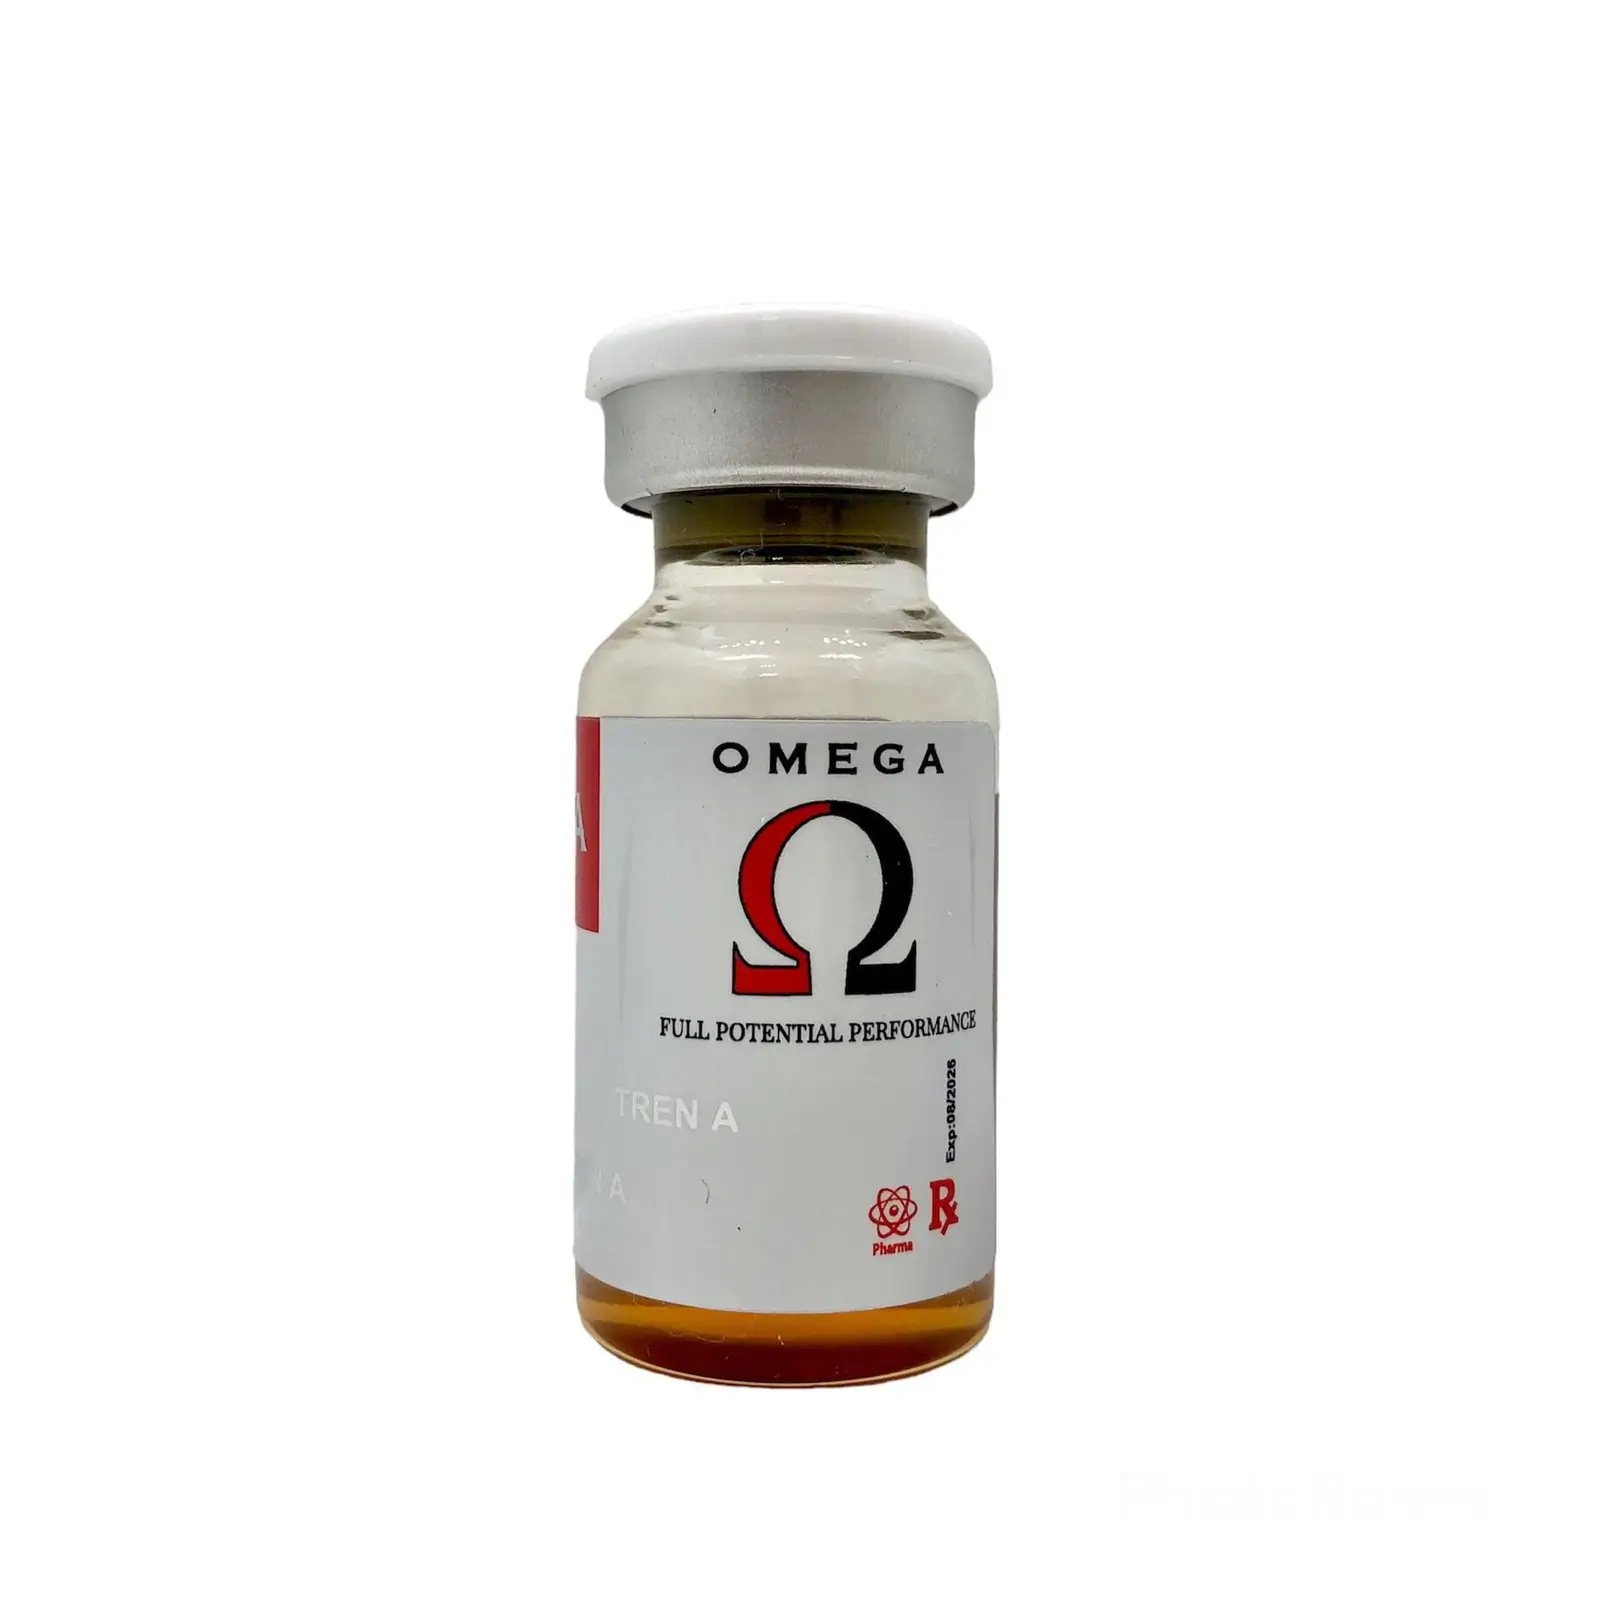 Trenbolone Acetate 100mg vial for rapid muscle gains - Omega Full Potential